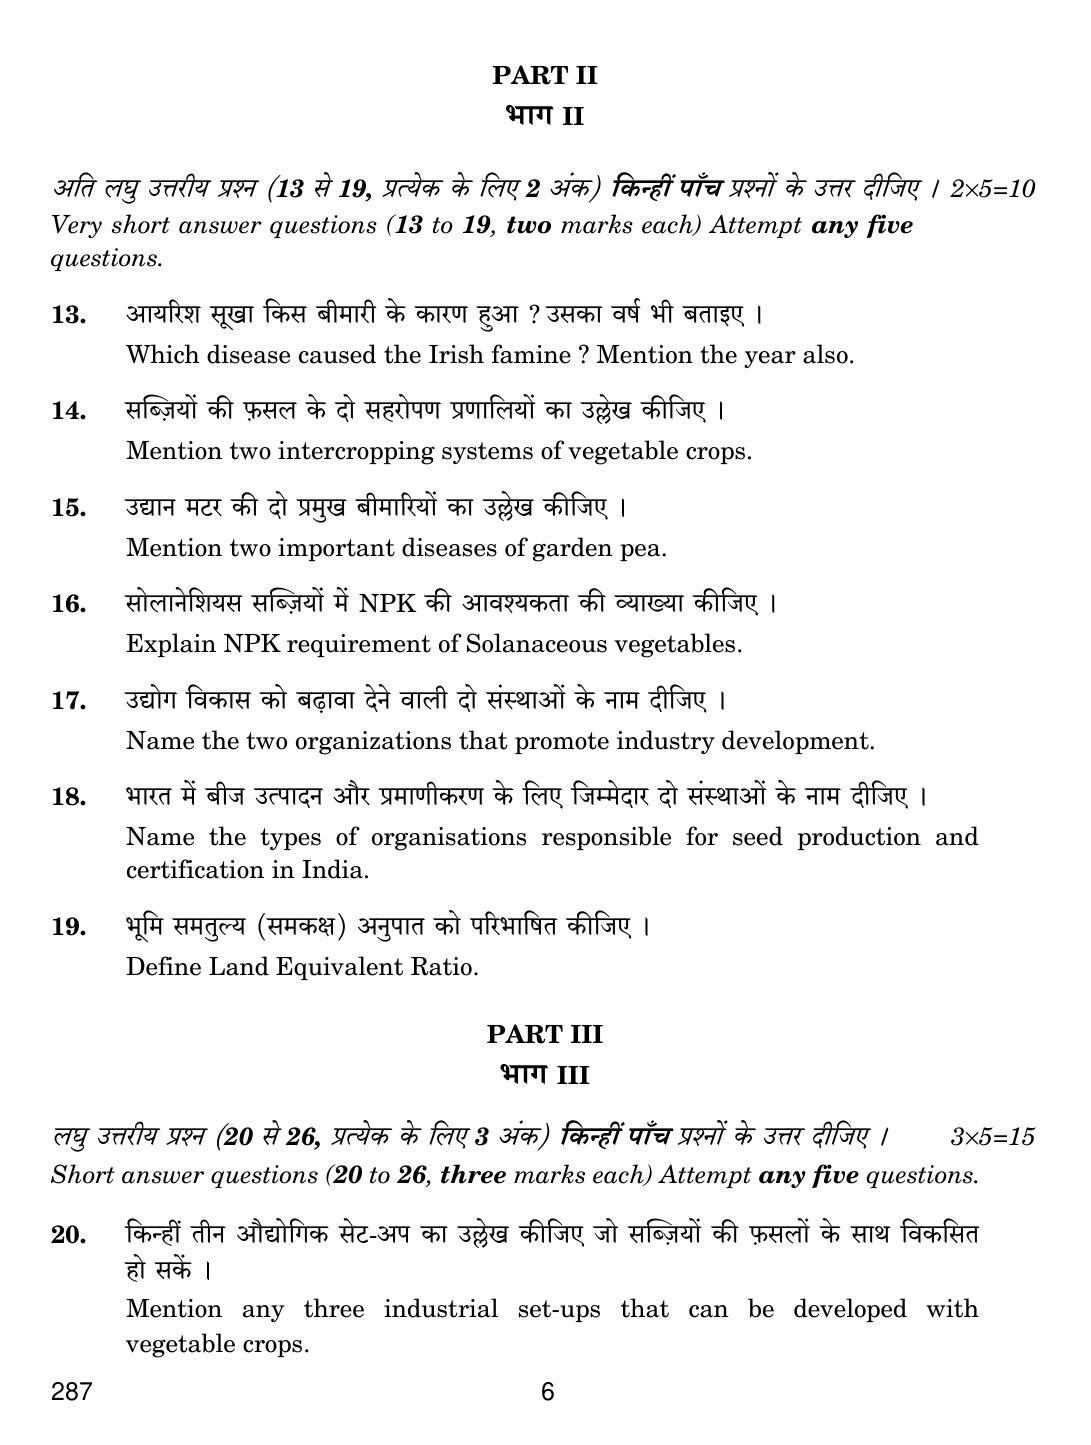 CBSE Class 12 287 Olericulture 2019 Question Paper - Page 6